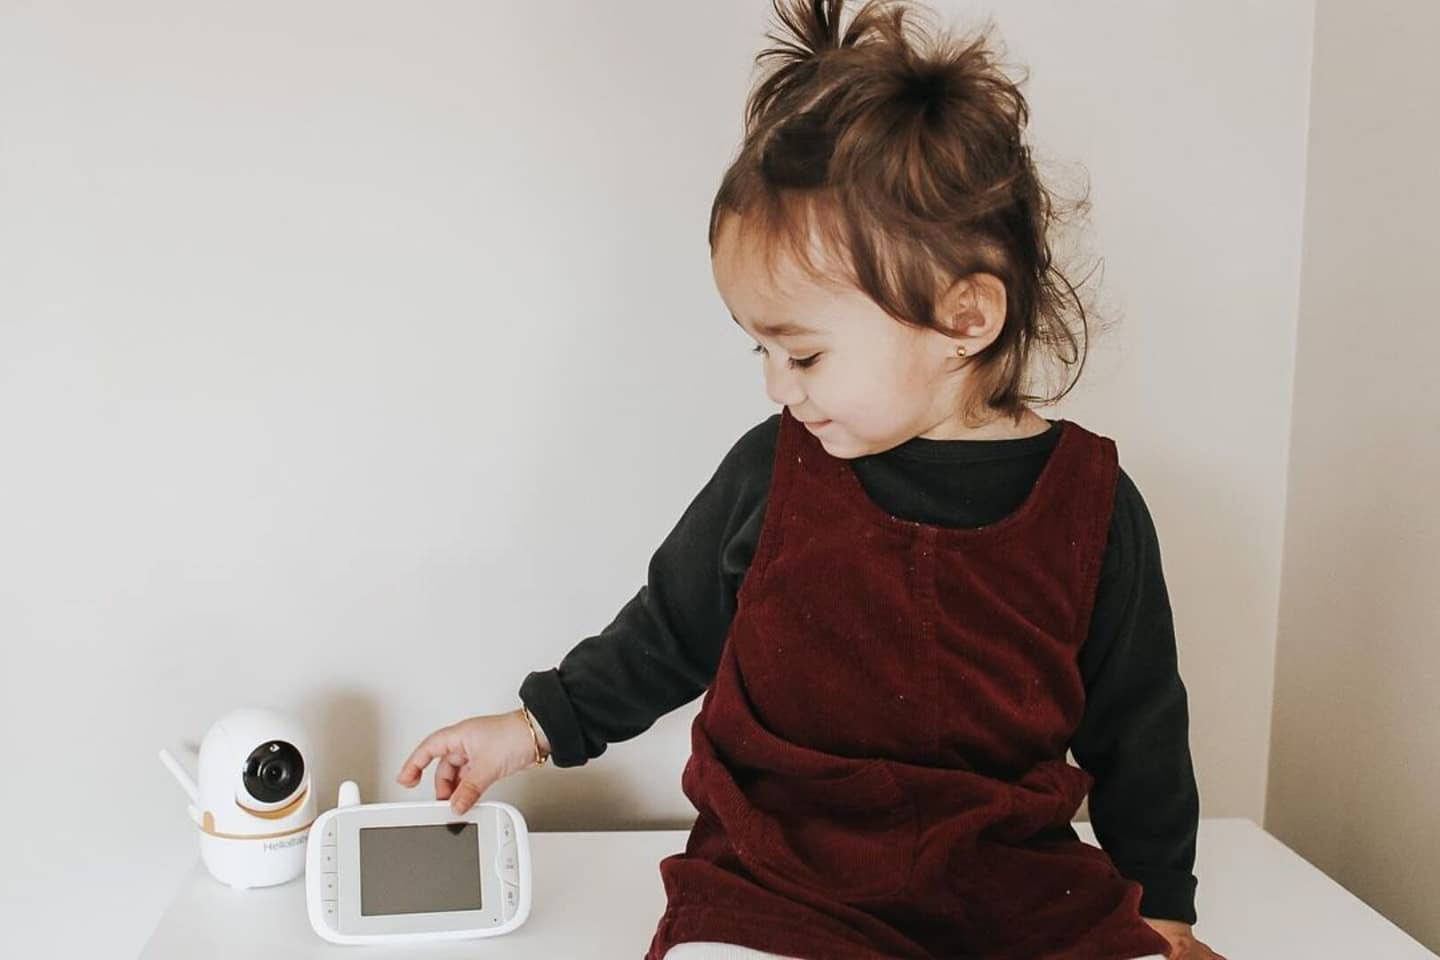 HelloBaby baby monitor with no wifi